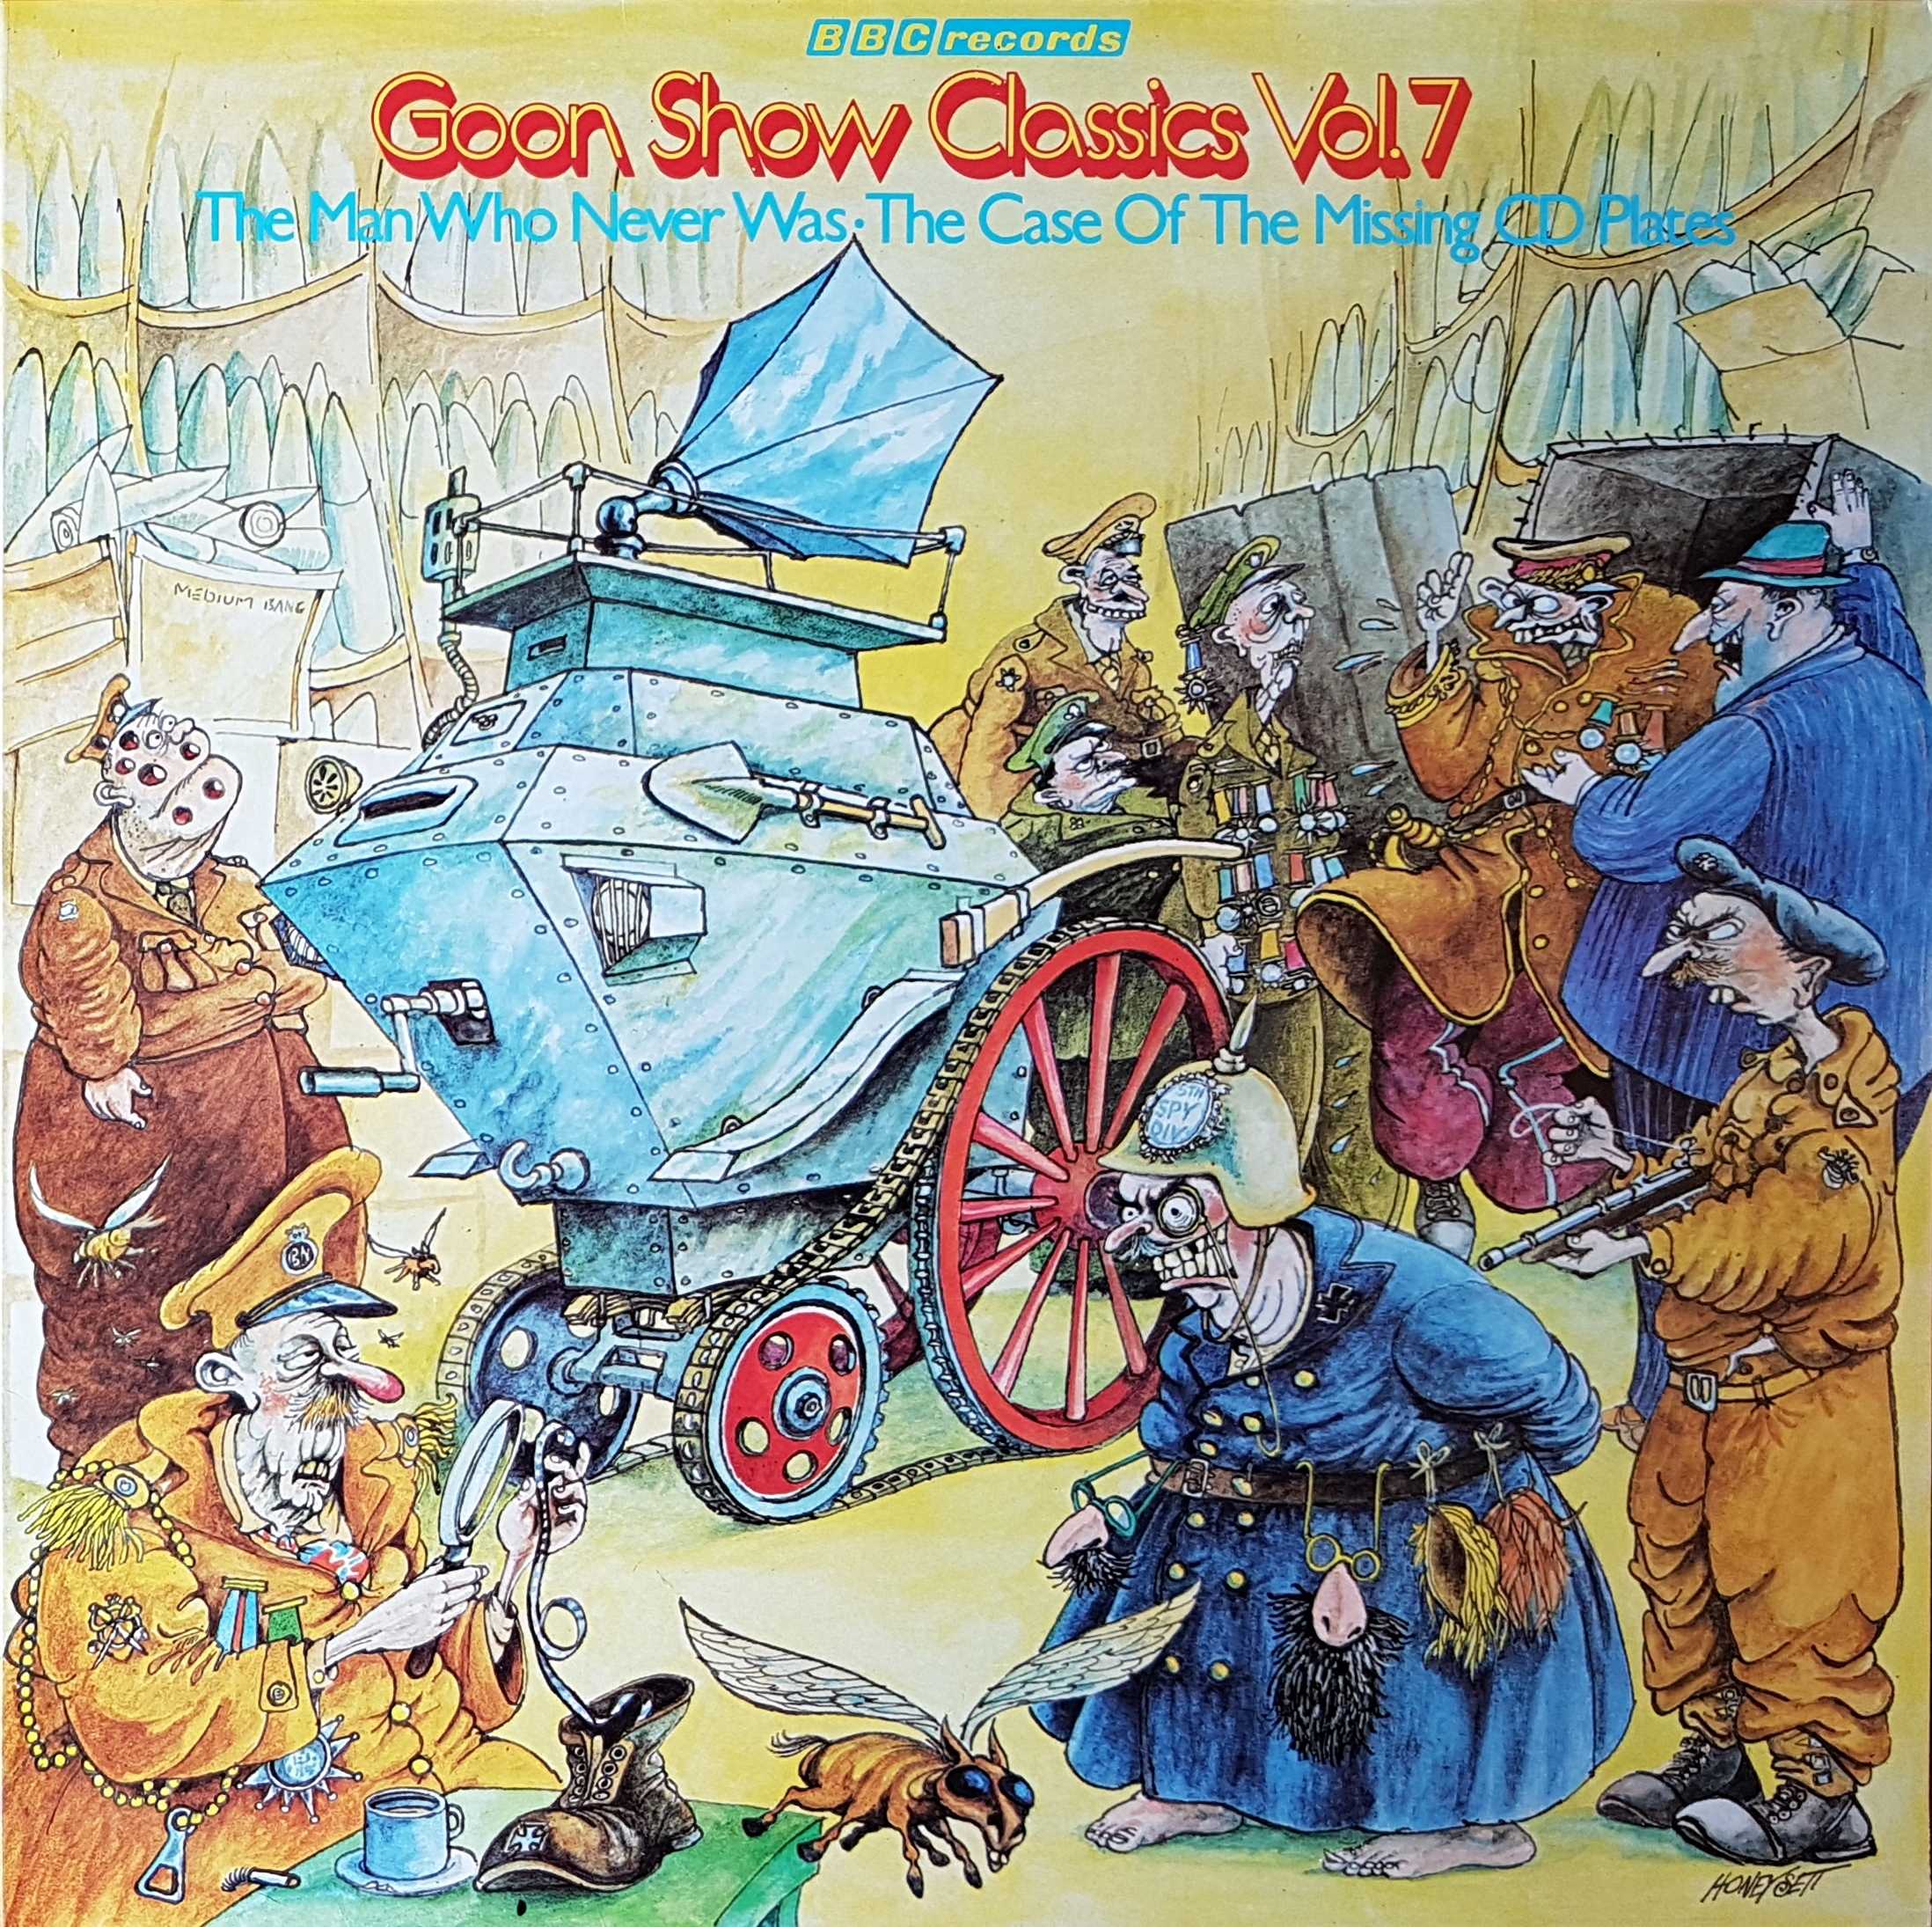 Picture of REB 392 Goon show classics - Volume 7 by artist Spike Milligan from the BBC albums - Records and Tapes library